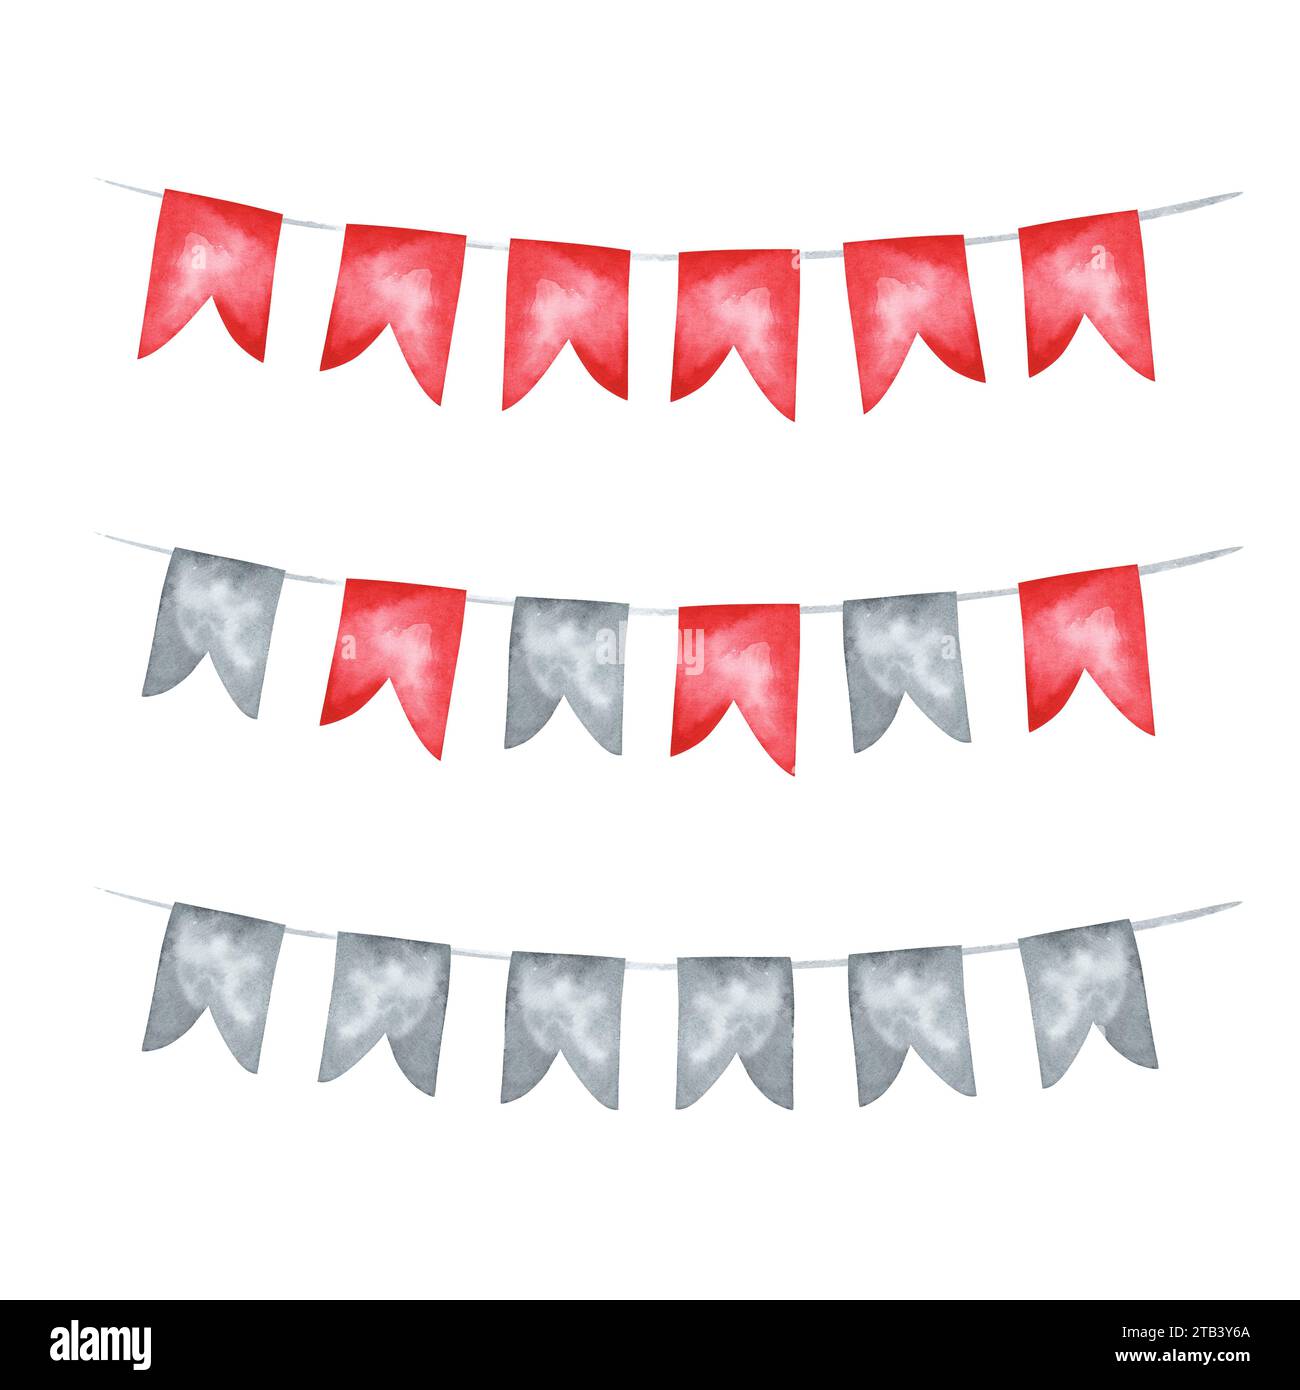 Watercolor illustration collection of red and grey flag buntings set . Hand painted sketchy drawing on white background, cut out clip art elements for Stock Photo